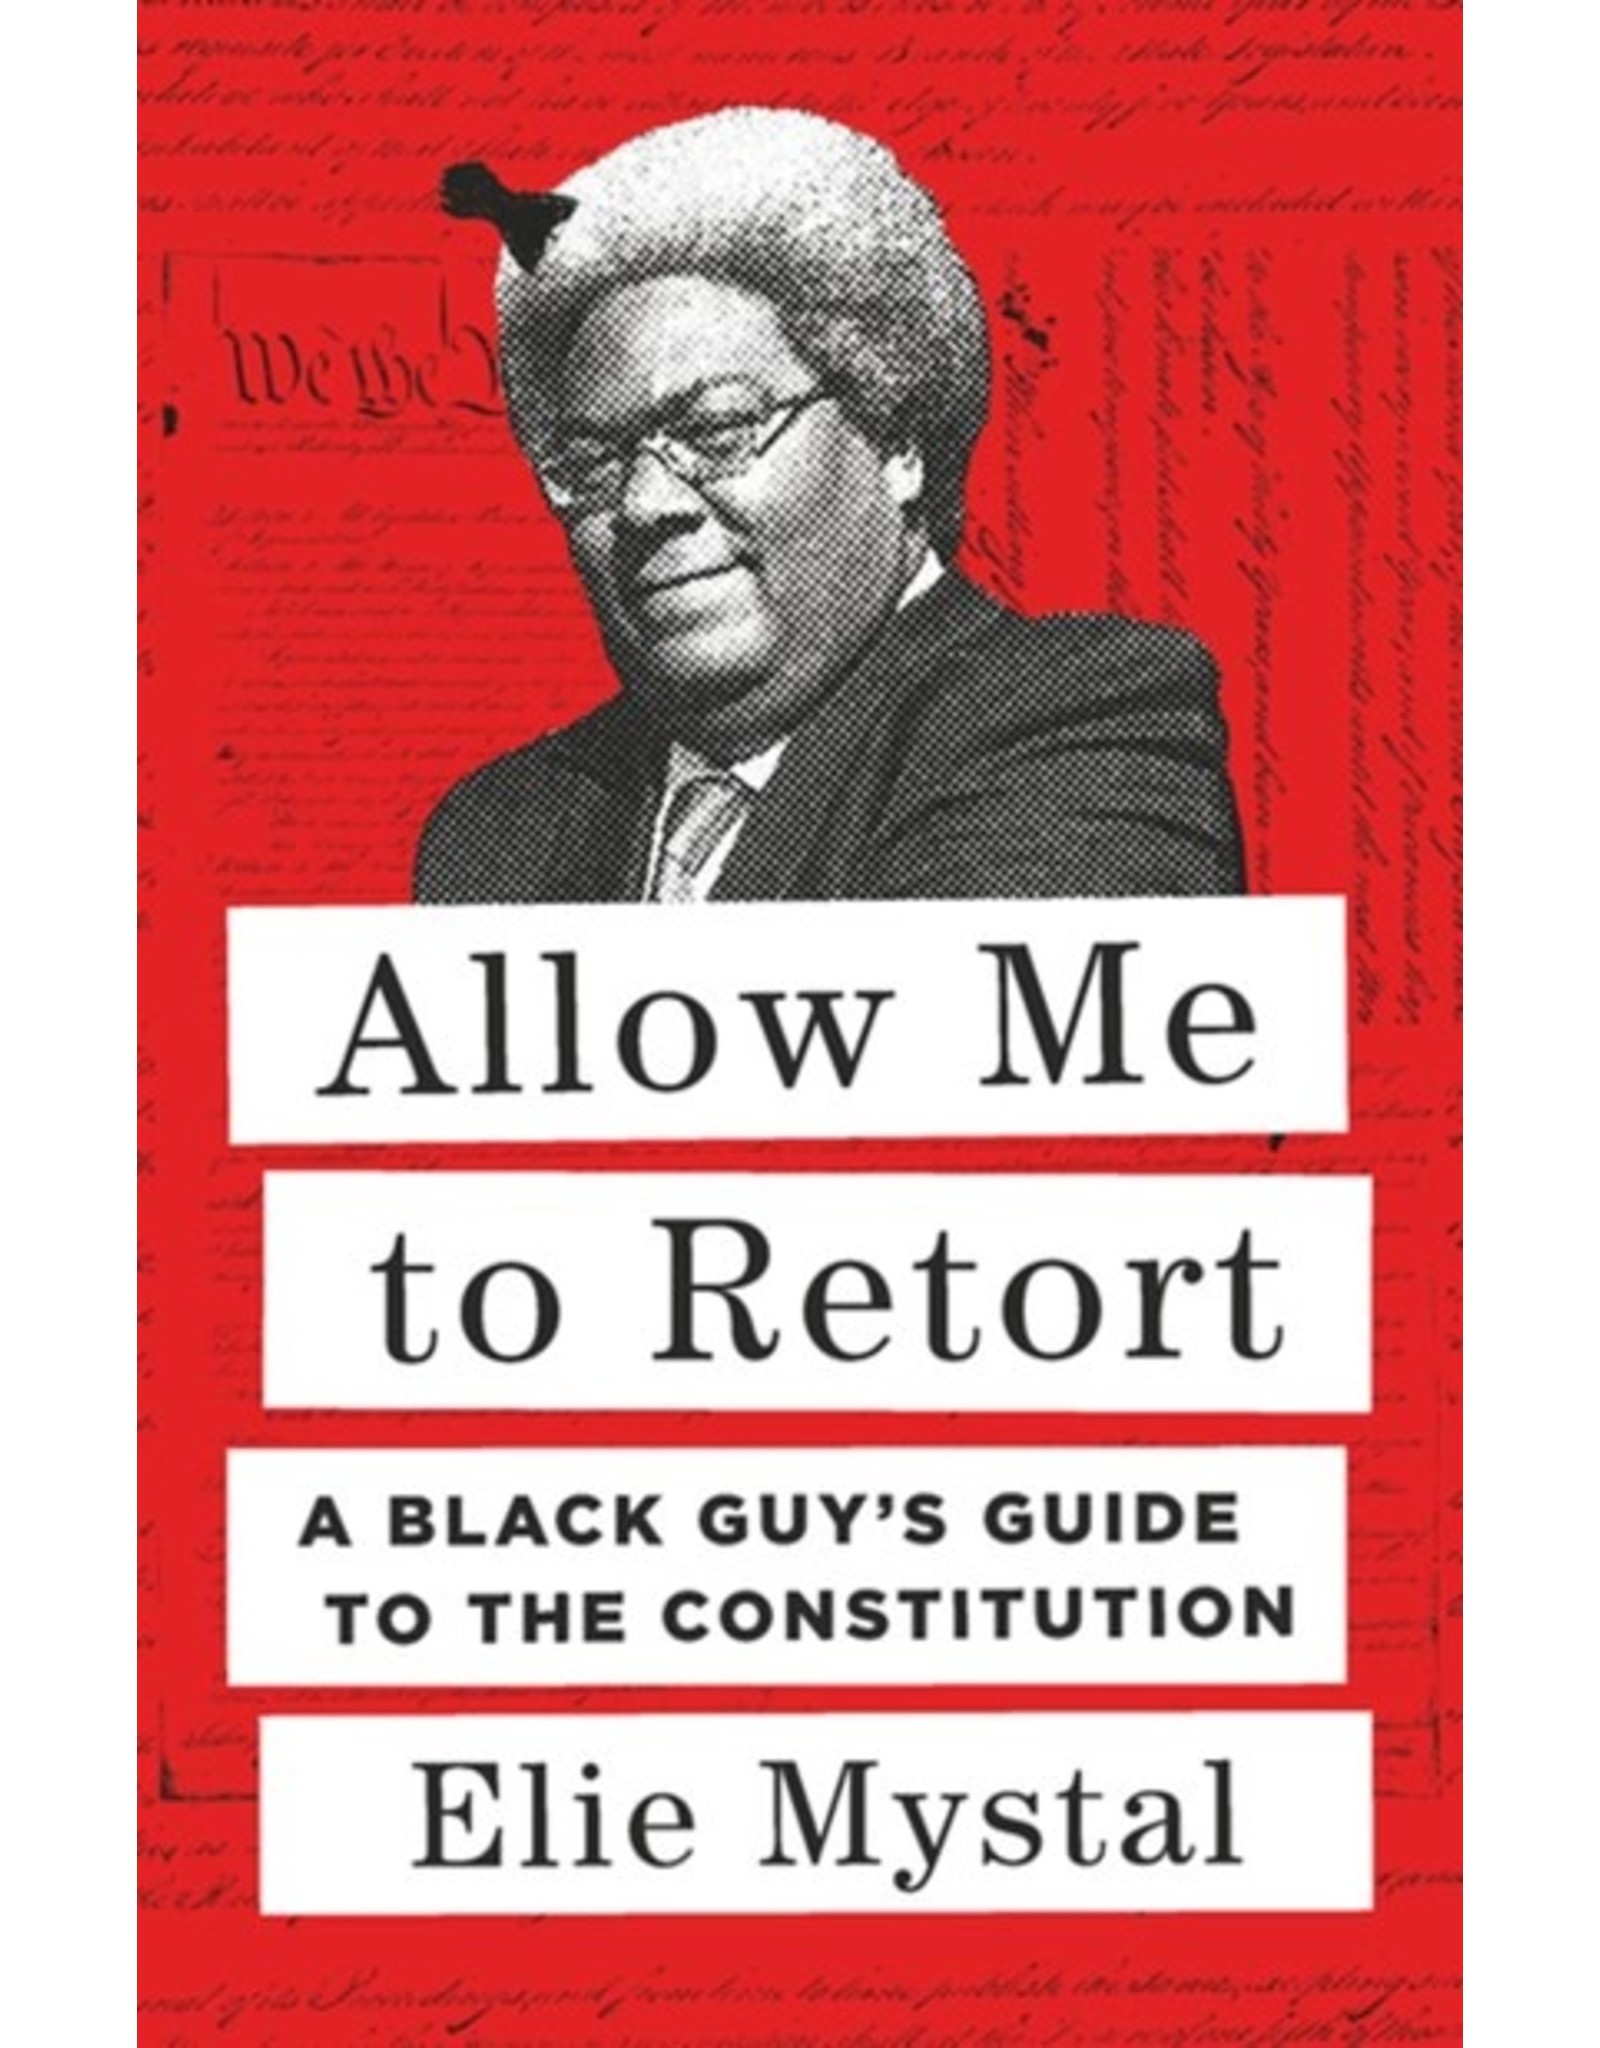 Books Allow Me to Retort : A Black Guy's Guide to the Constitution by Elie Mystal (Virtual Event 3.30)